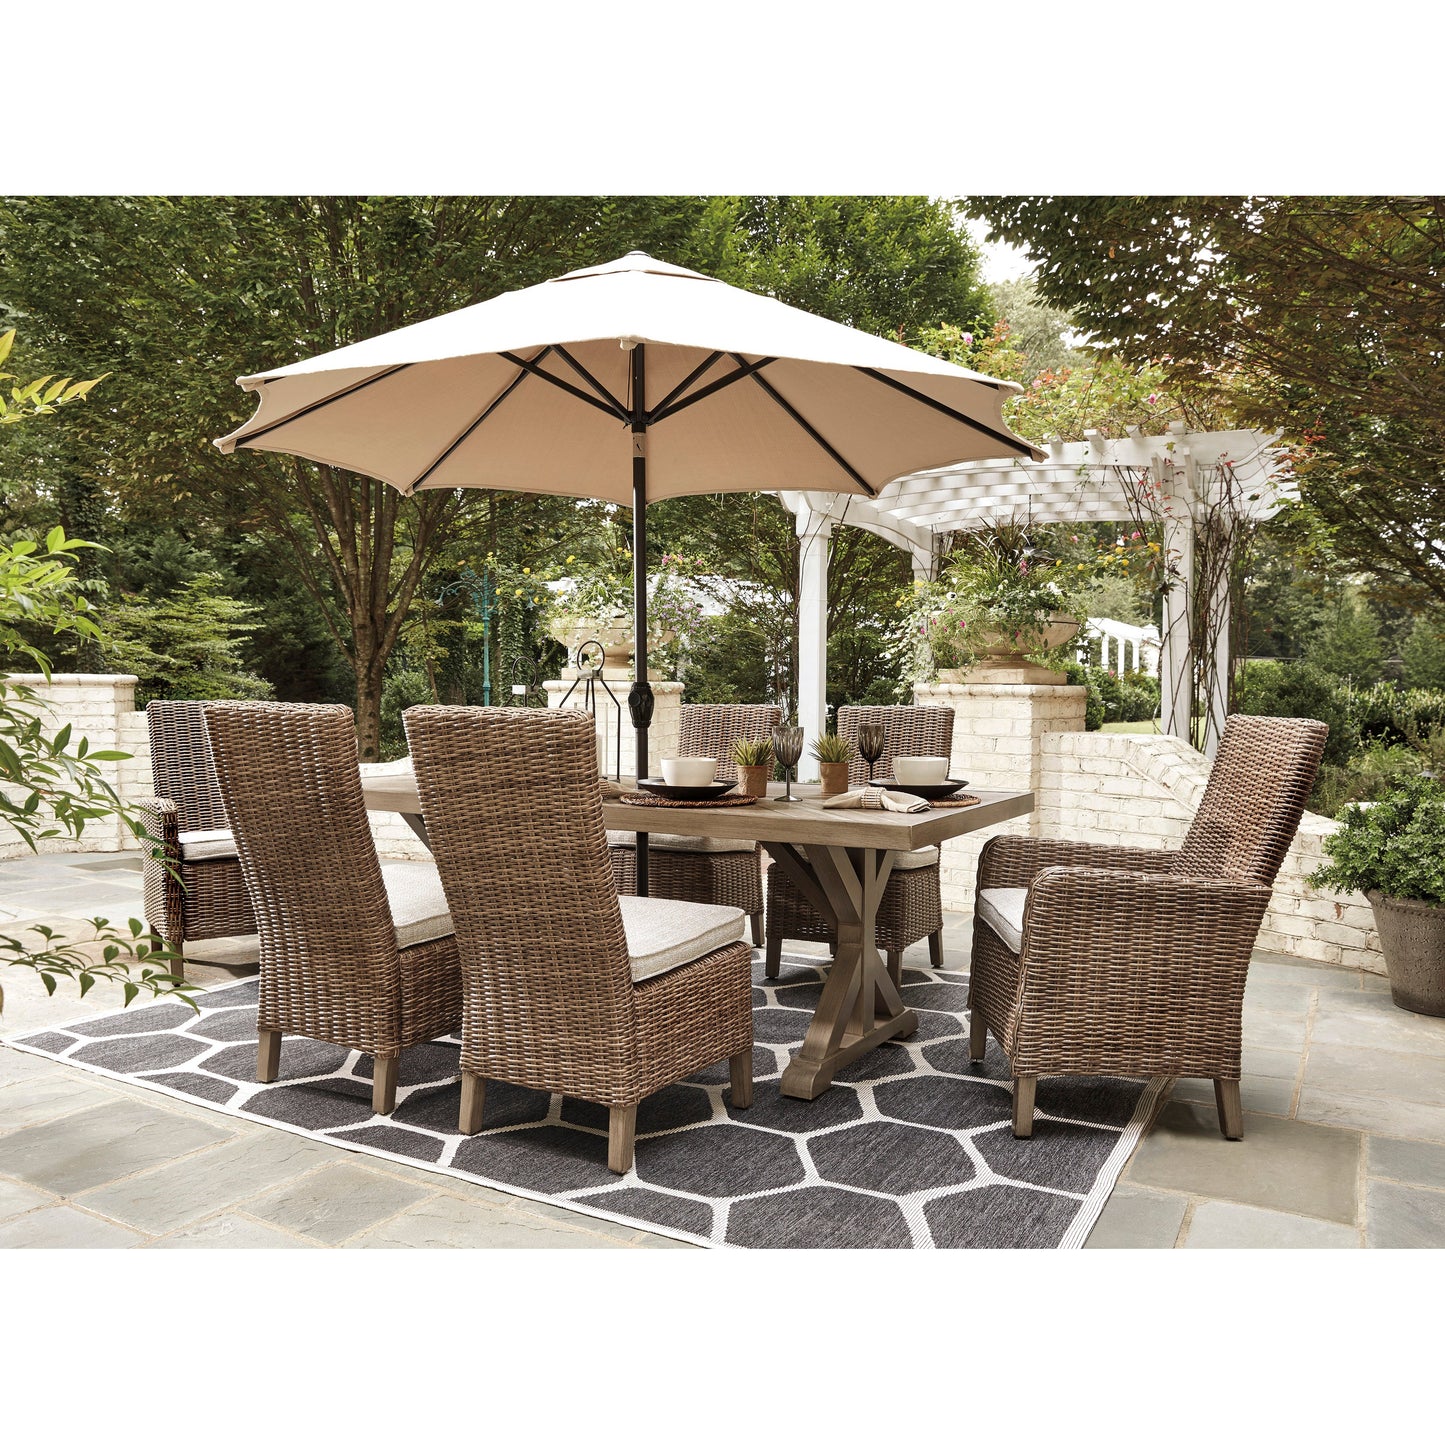 BEACHCROFT OUTDOOR DINING TABLE & 4 CHAIRS